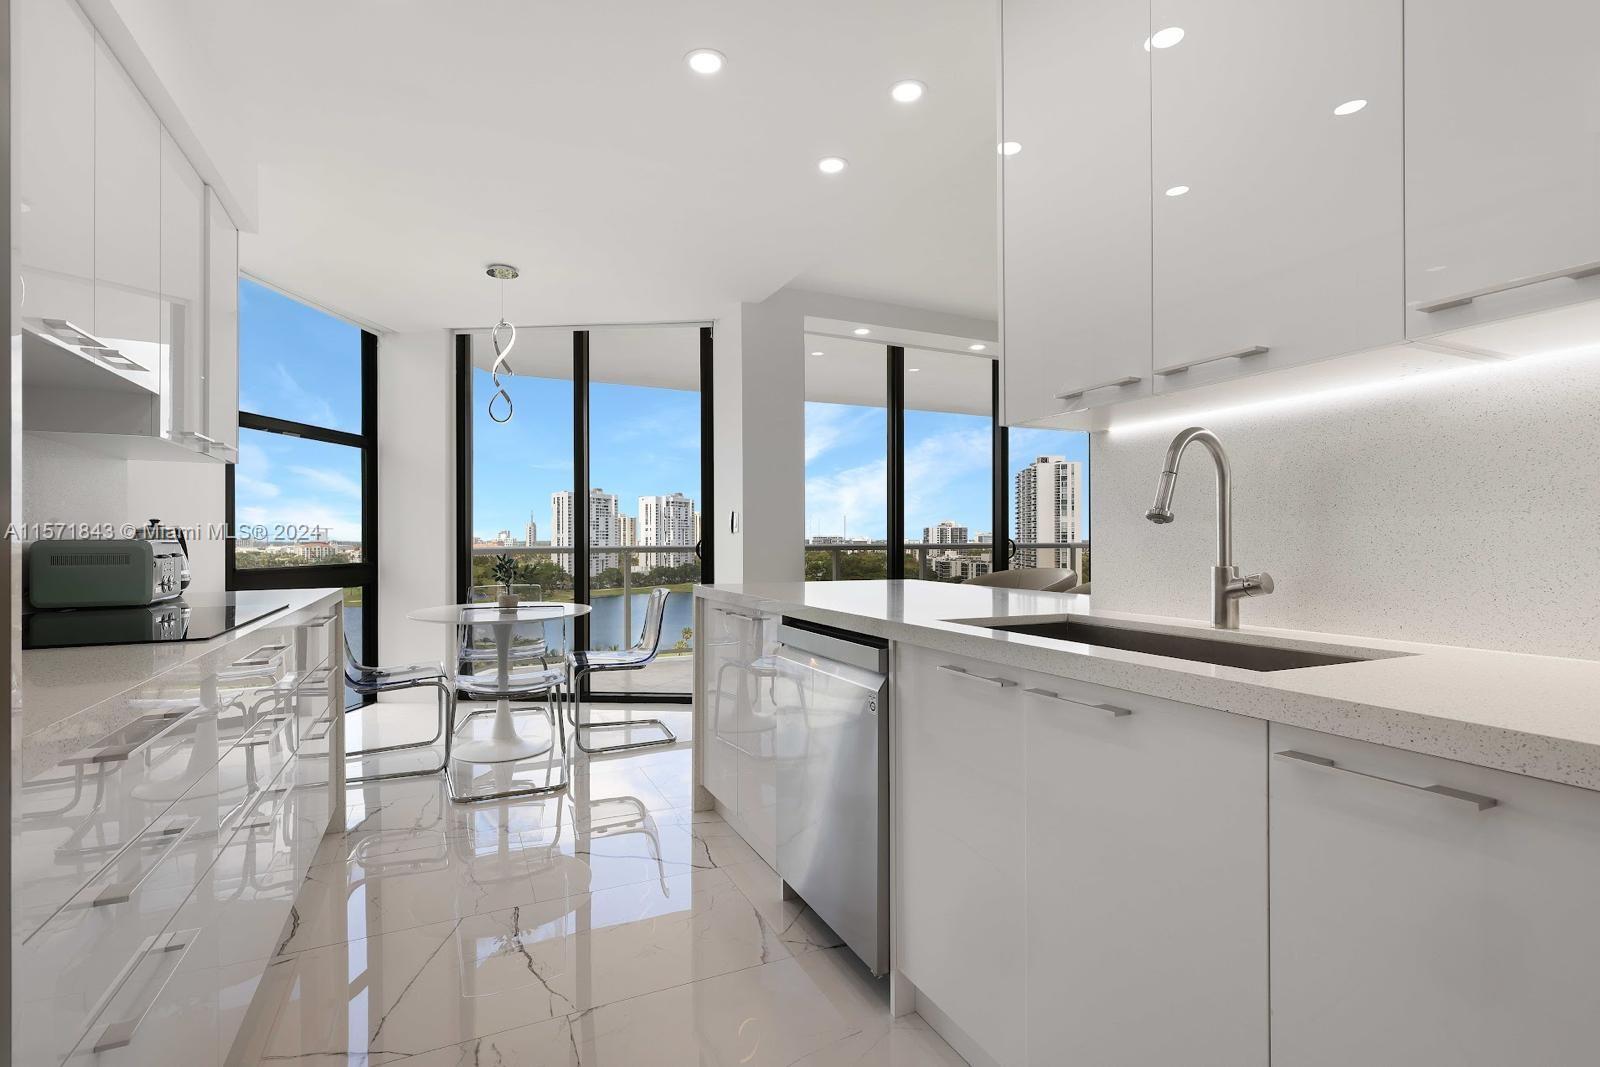 Welcome to a luxury Condo located in Aventura at Hamptons West. A 2 beds / 2 baths, with 1,560 sqft.